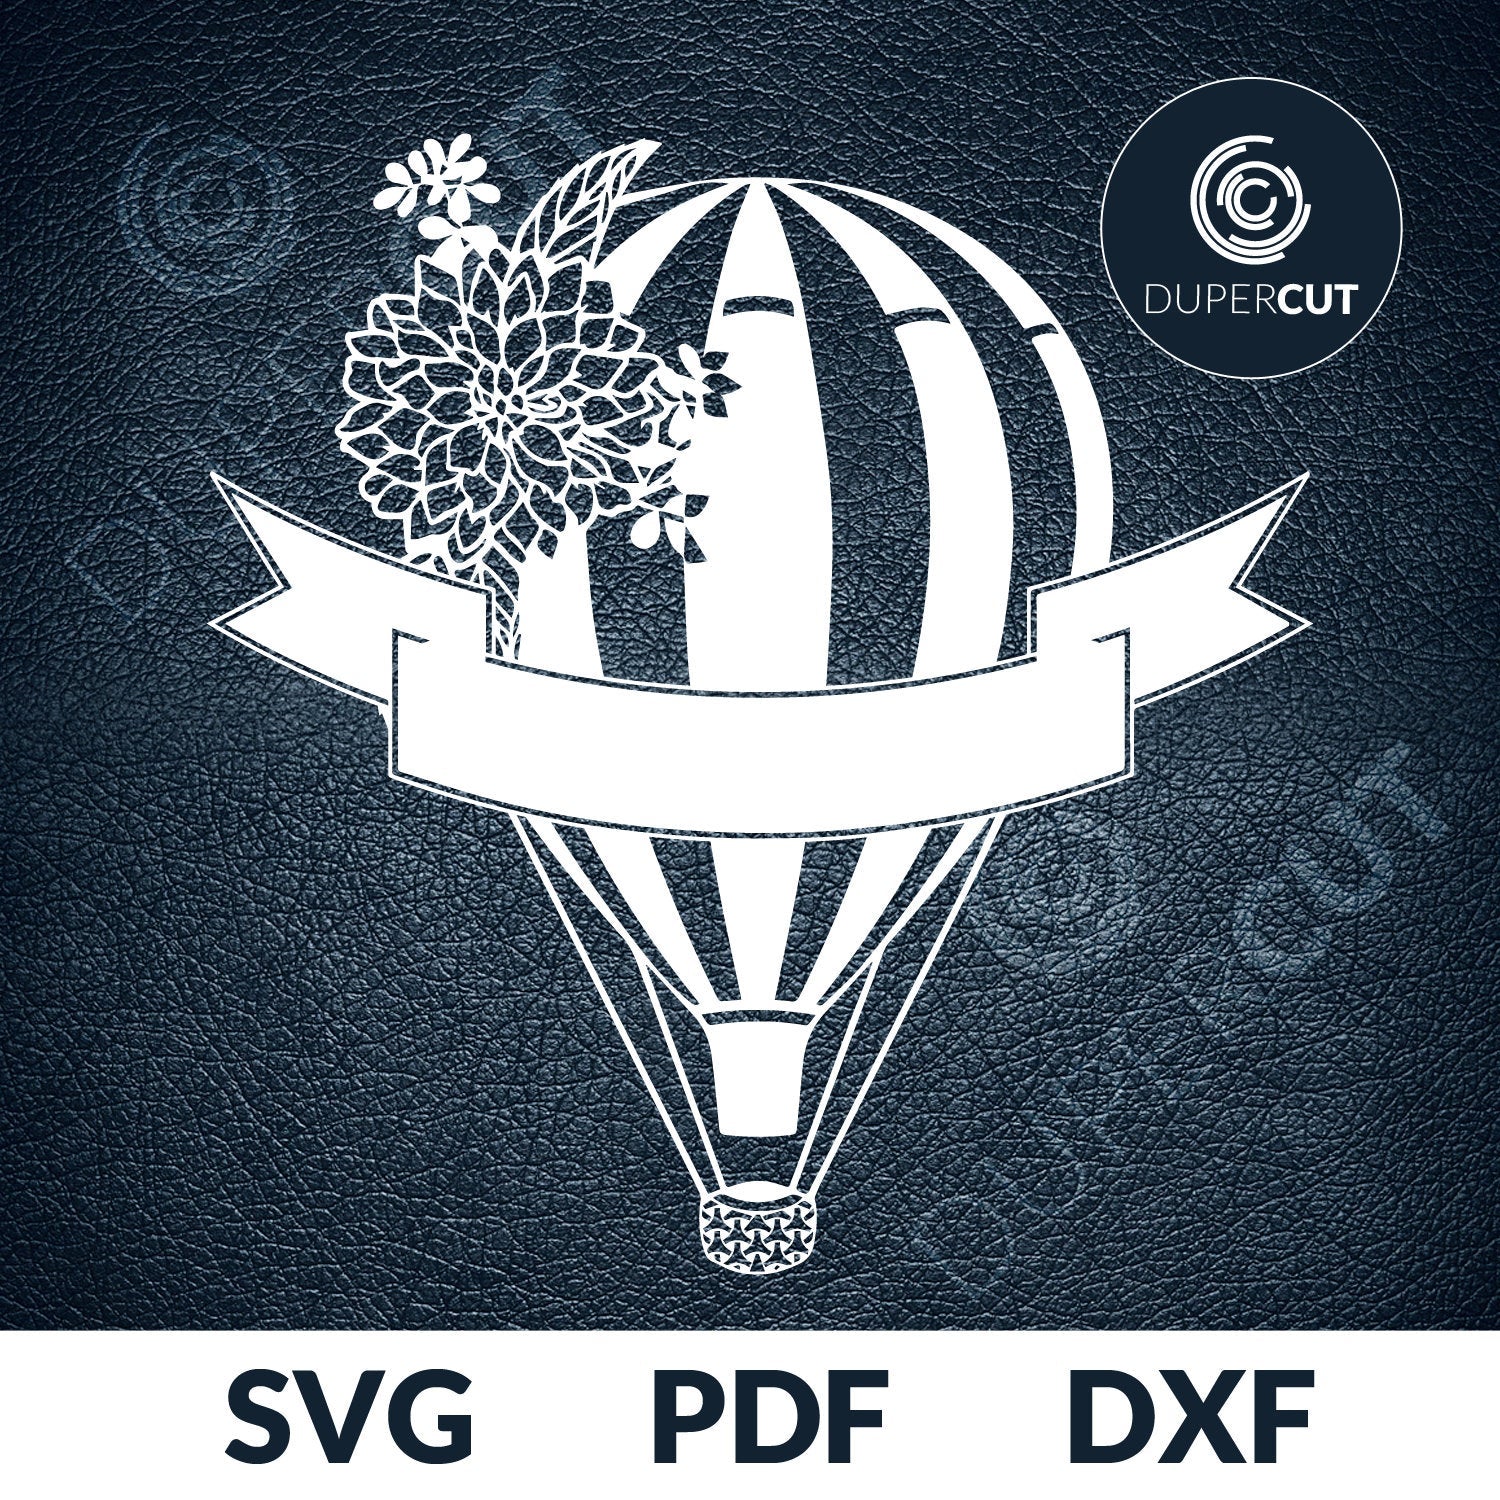 Paper cutting template - Hot Air Balloons with flowers, add your own text - SVG PNG DXF files for cutting machines: Cricut, Silhouette Cameo, Glowforge, CNC